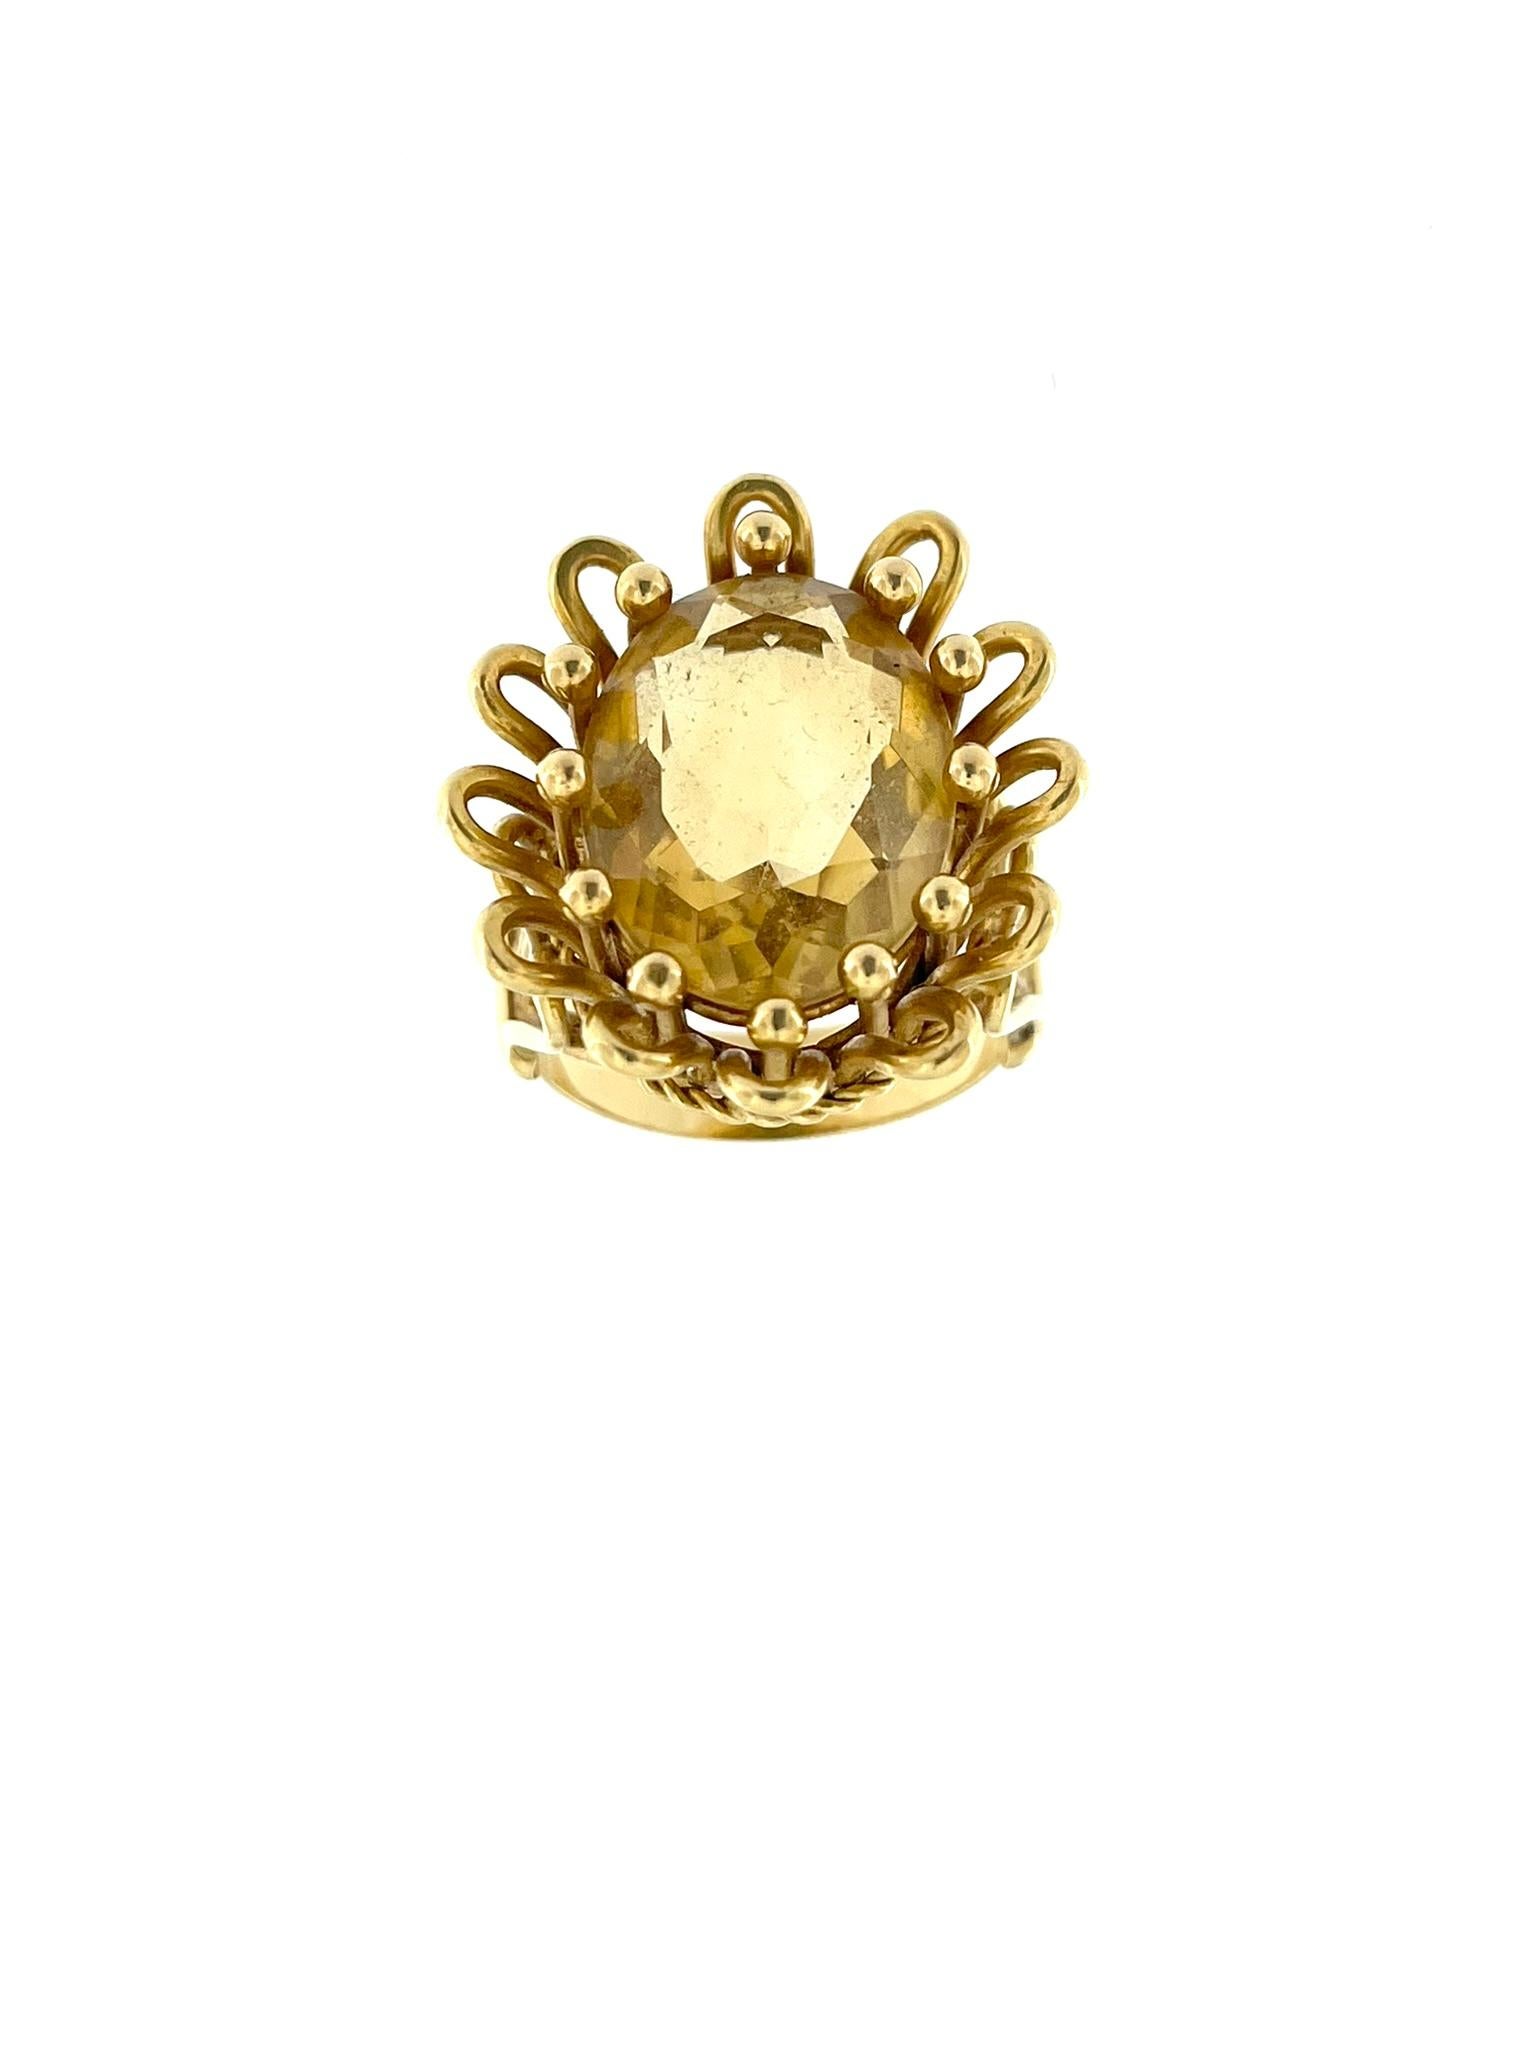 The Vintage Yellow Gold Hand-Made French Ring with an 11.00ct Citrine is a testament to the artistry and craftsmanship of French jewelry design. Crafted from 18-karat yellow gold, this ring exudes warmth and luxury, embodying the elegance and